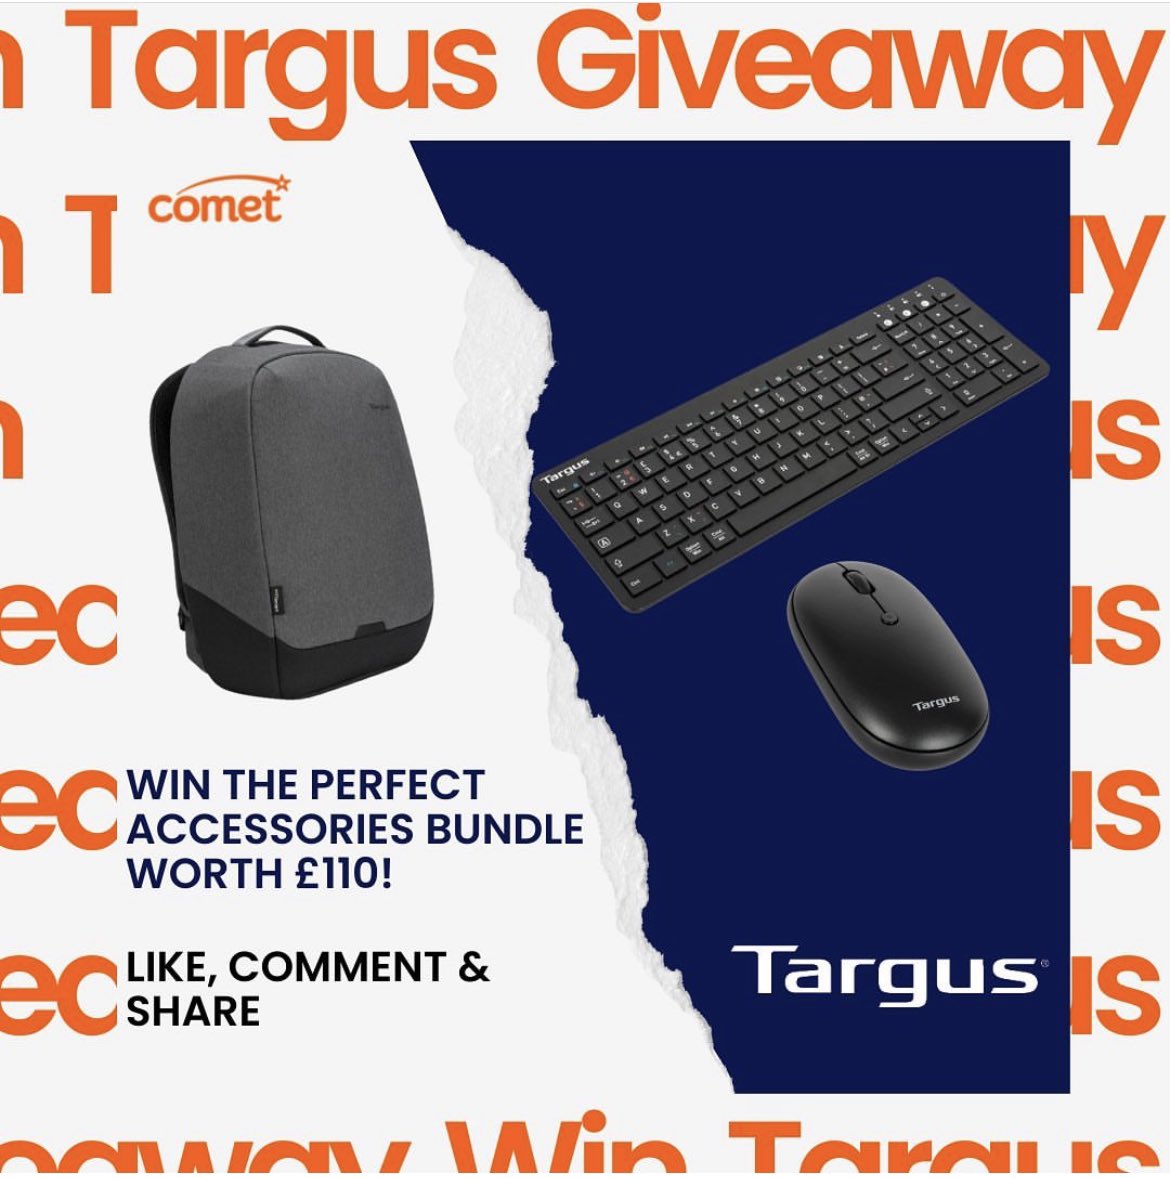 COMET X TARGUS GIVEAWAY

We have teamed up with Wahl to give one lucky person the chance to win this amazing @Targus bundle 

How to enter:

🧡Follow @CometLtd

👍🏻 Like this post

💫 For an extra entry Retweet this tweet

Check below for Ts&Cs